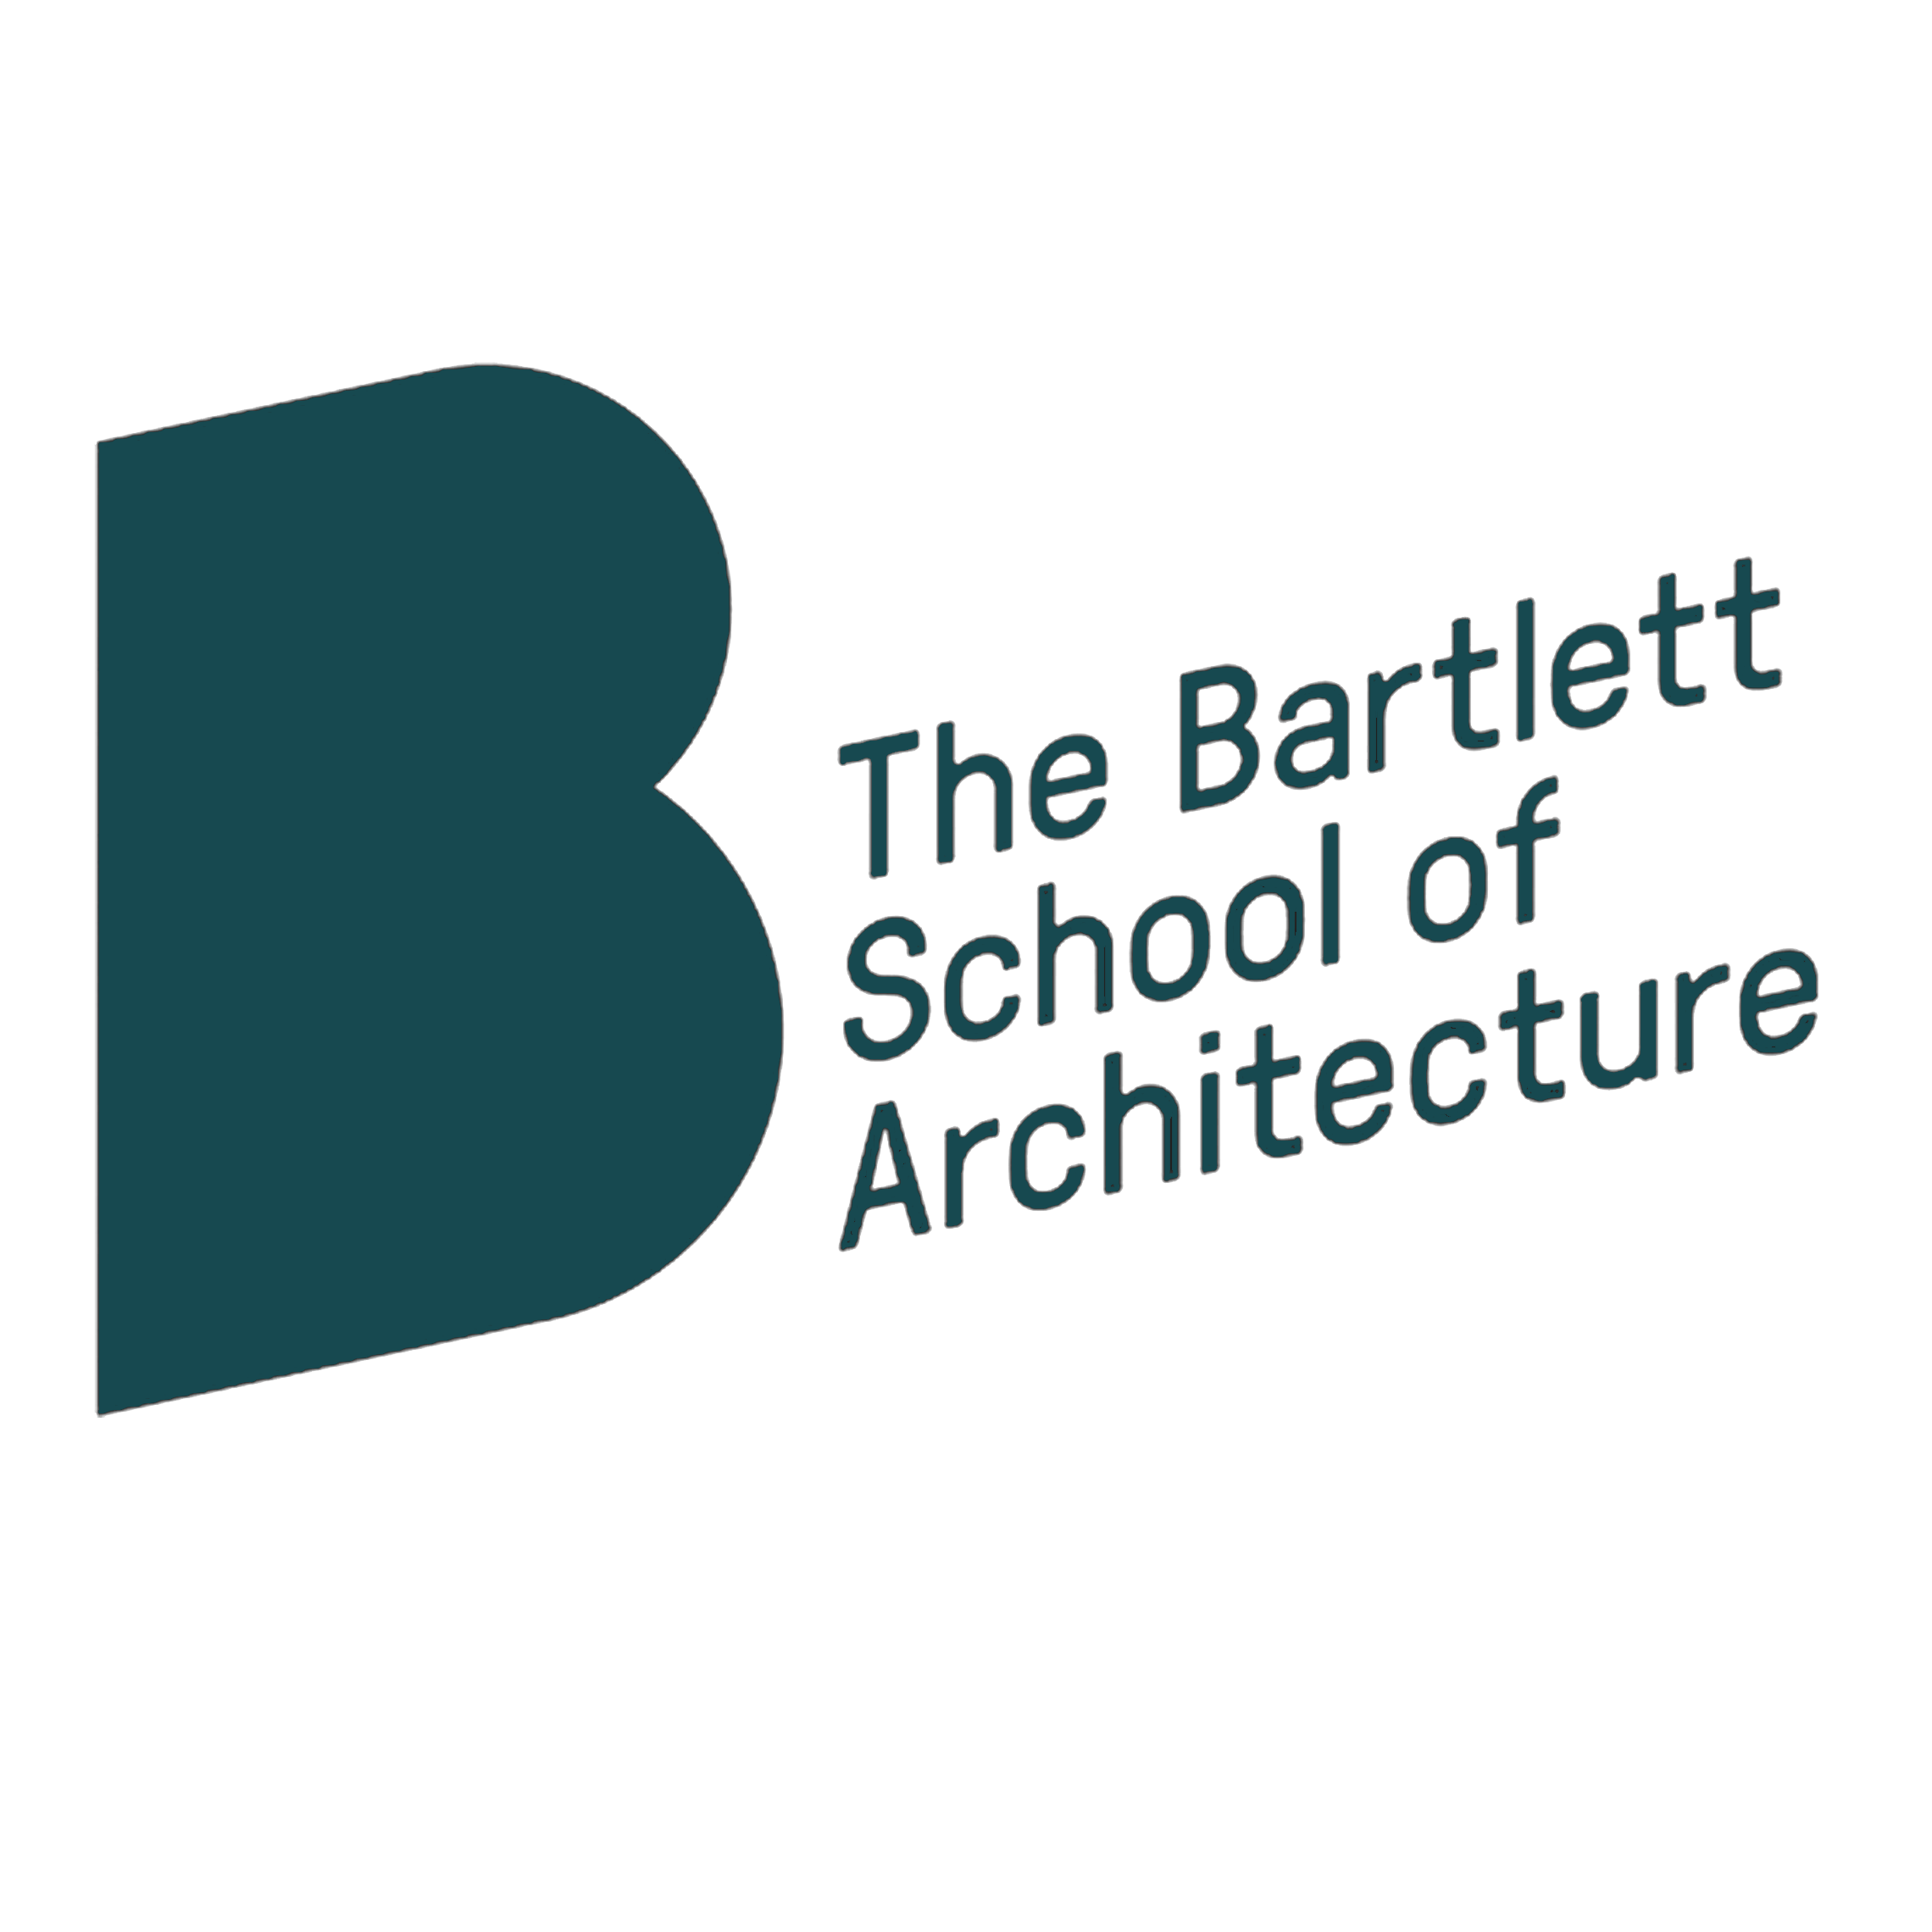 UCL Bartletts School of Architecture